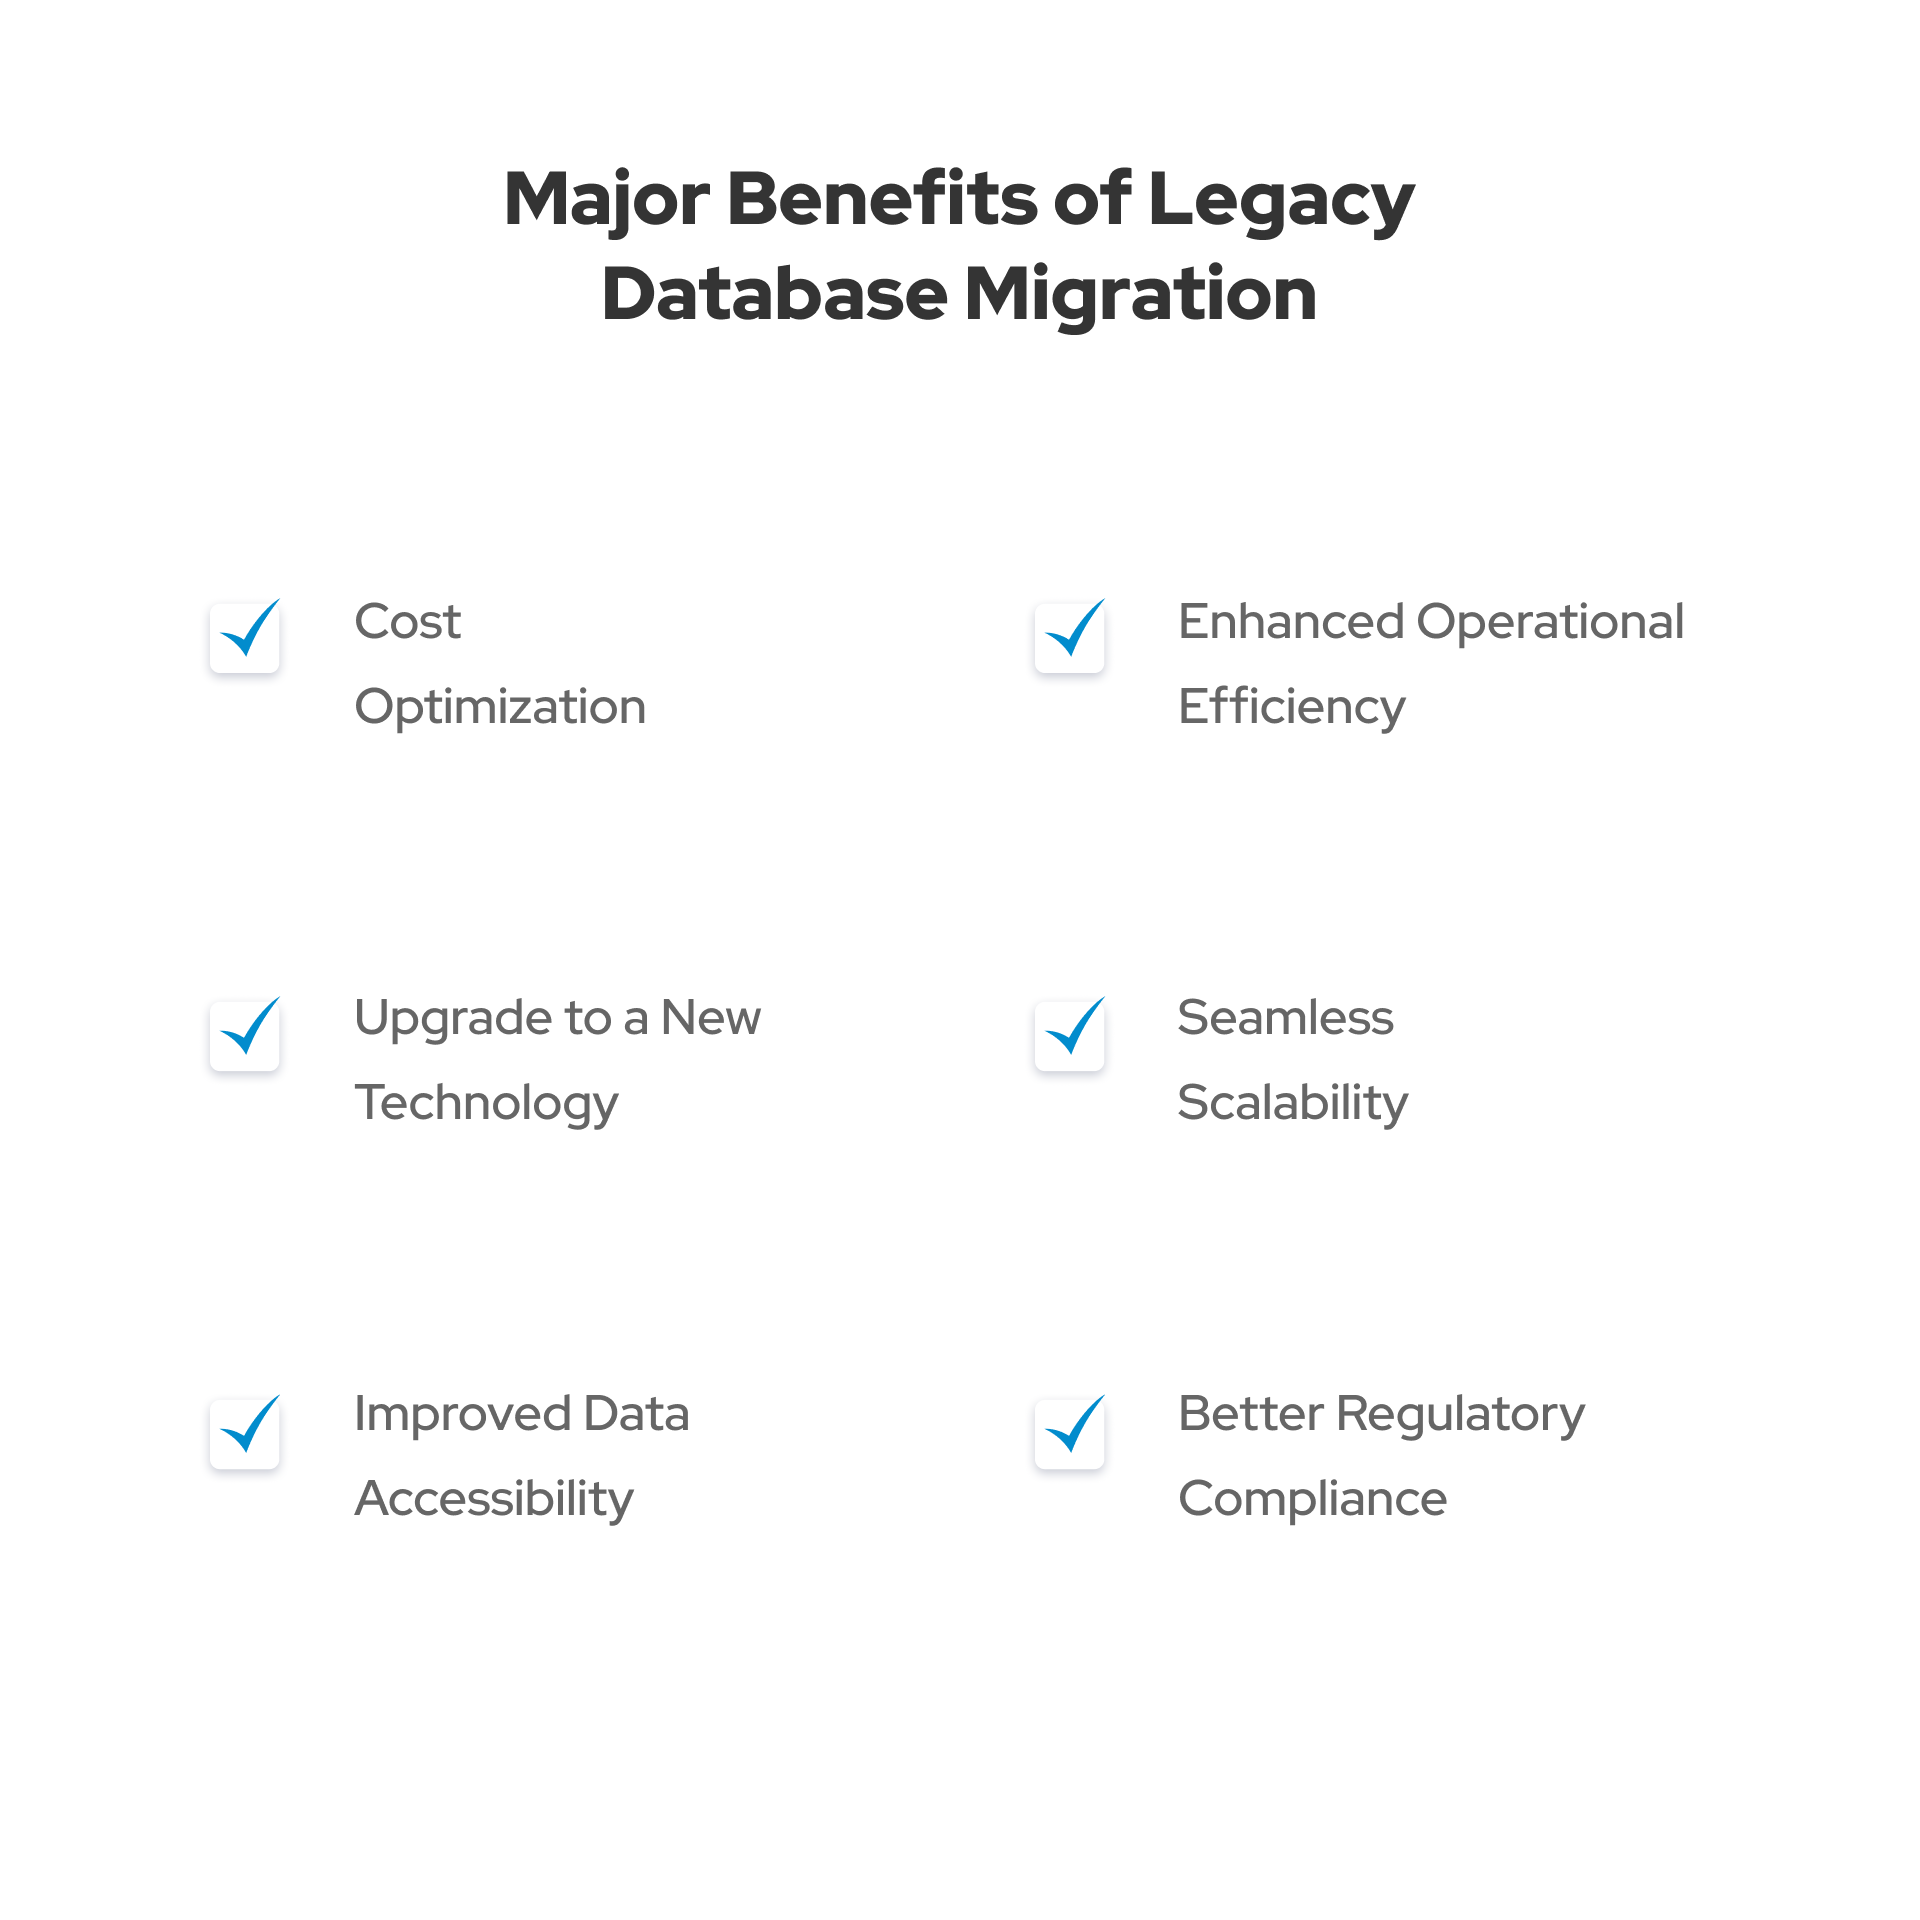 The major benefits of legacy data migration include better data accessibility and security, improved operational efficiency, and cost optimization.